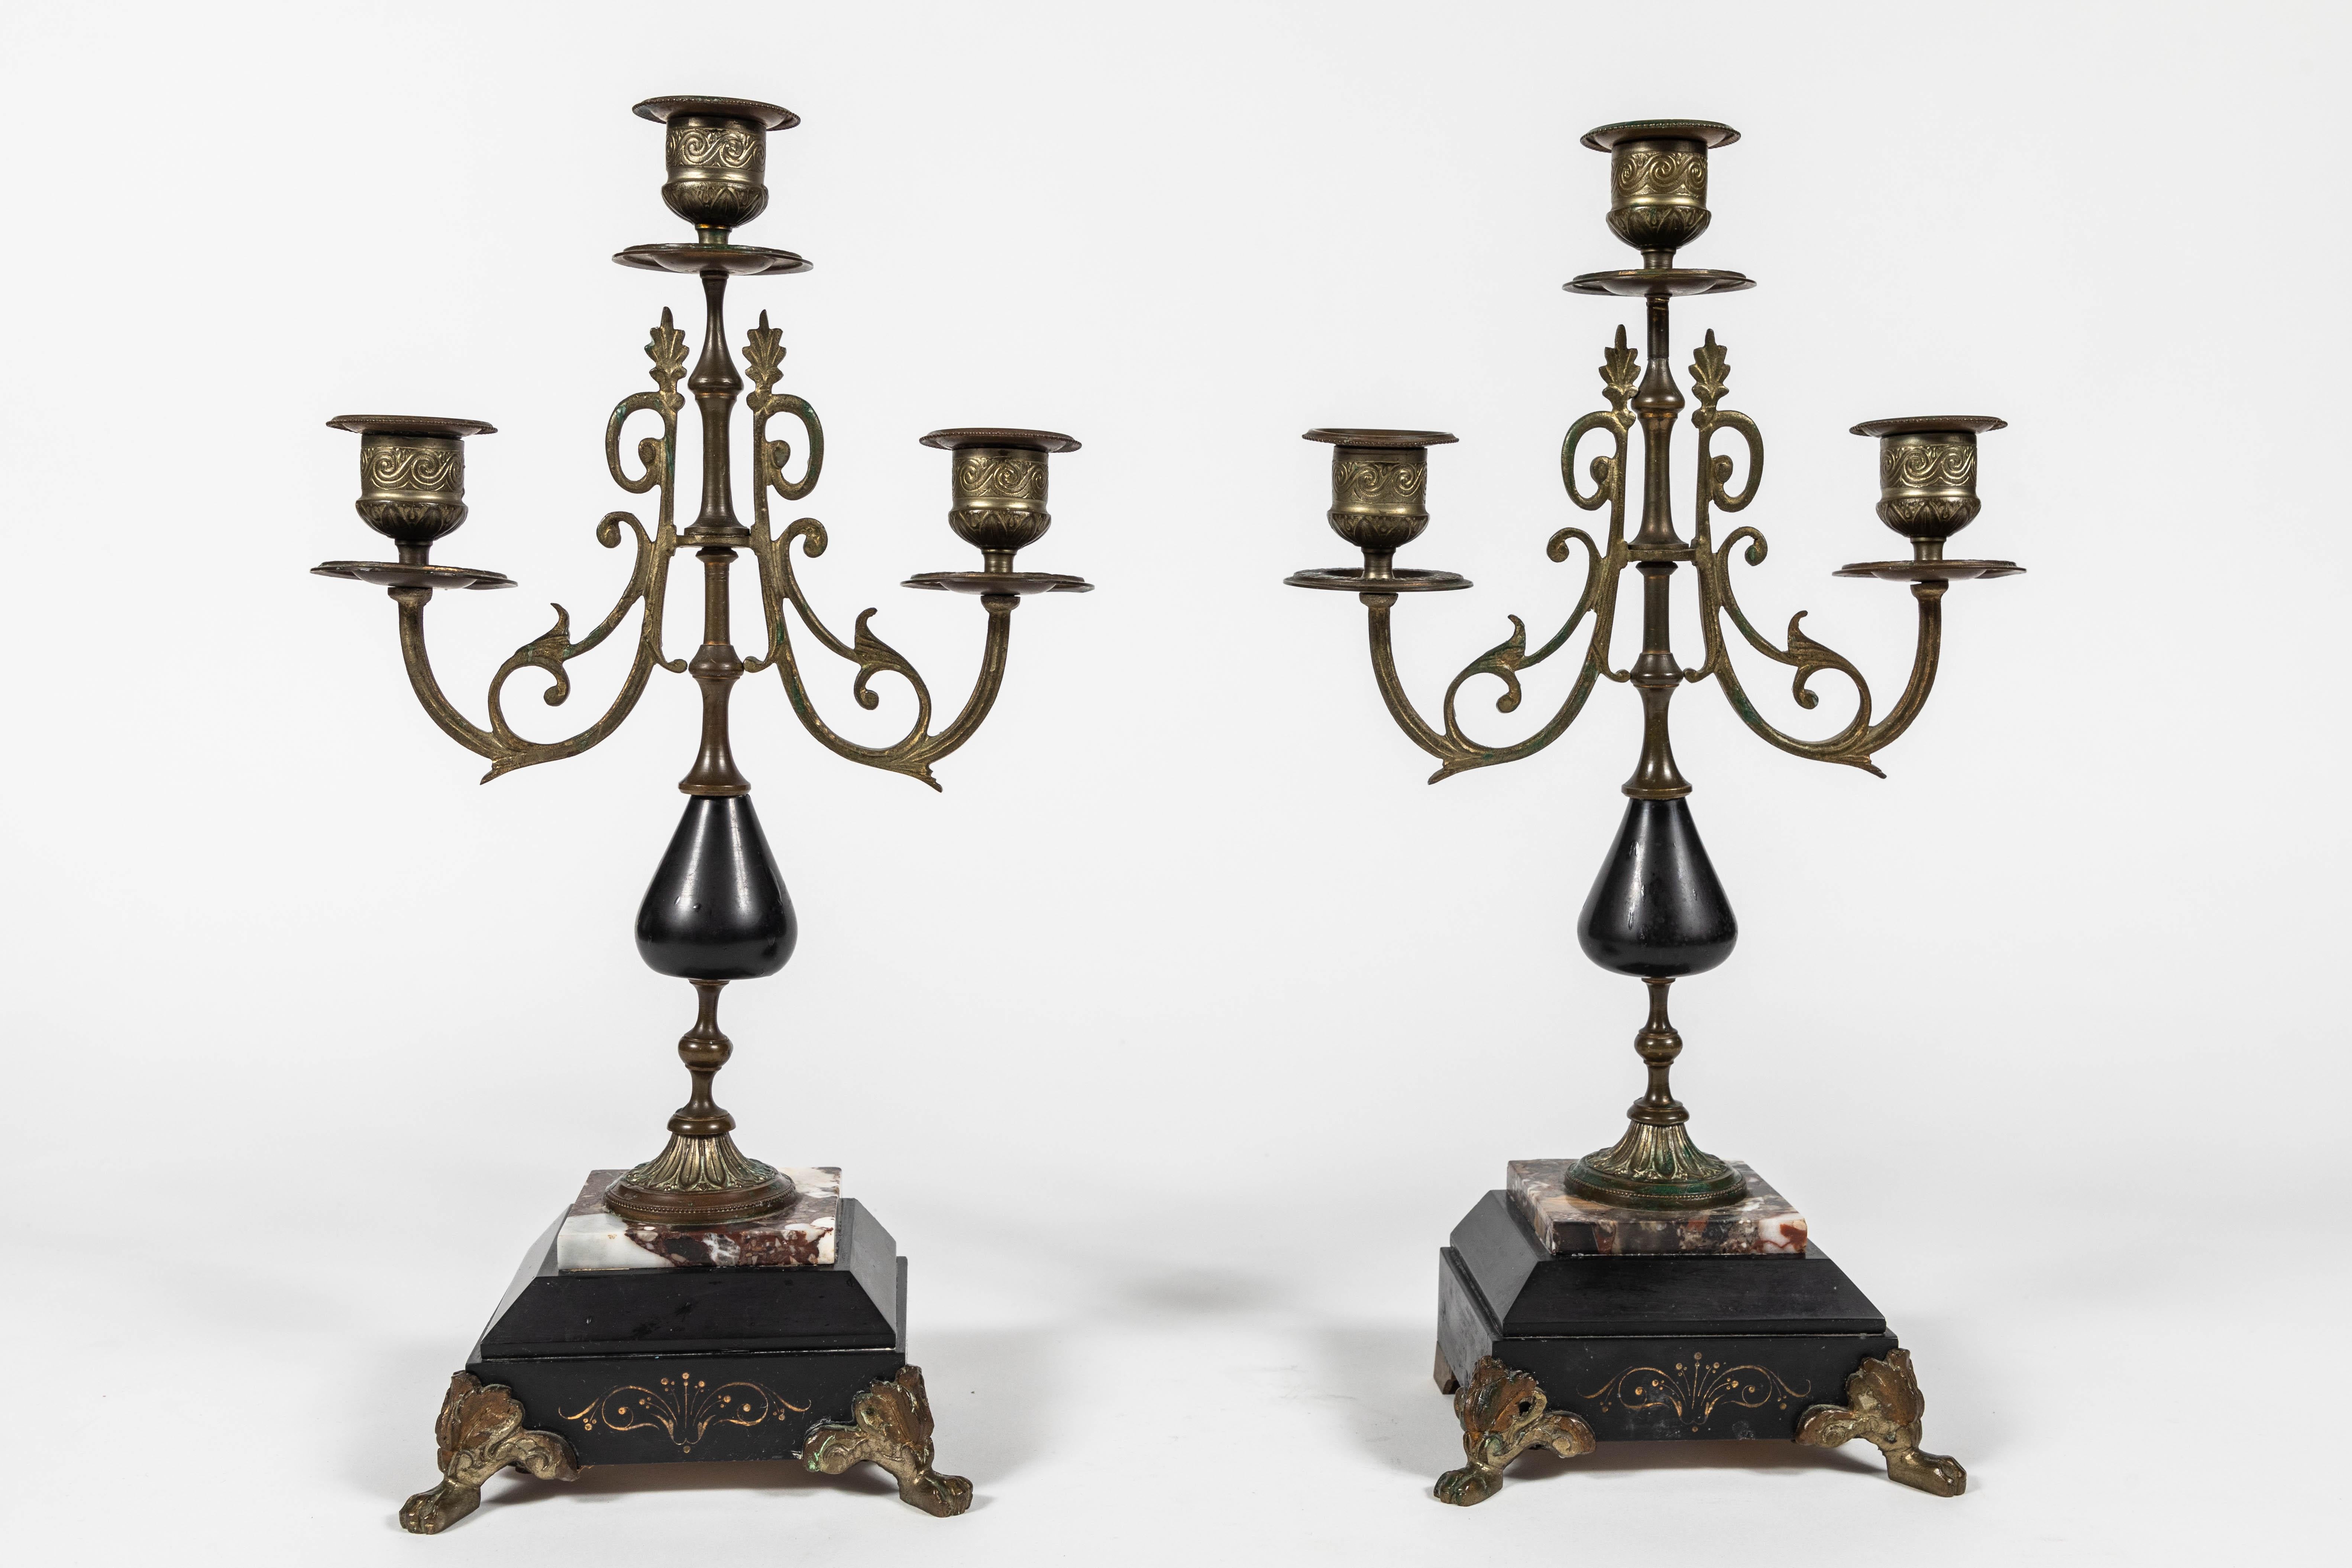 Pair of antique French Empire style marble and brass candelabras.